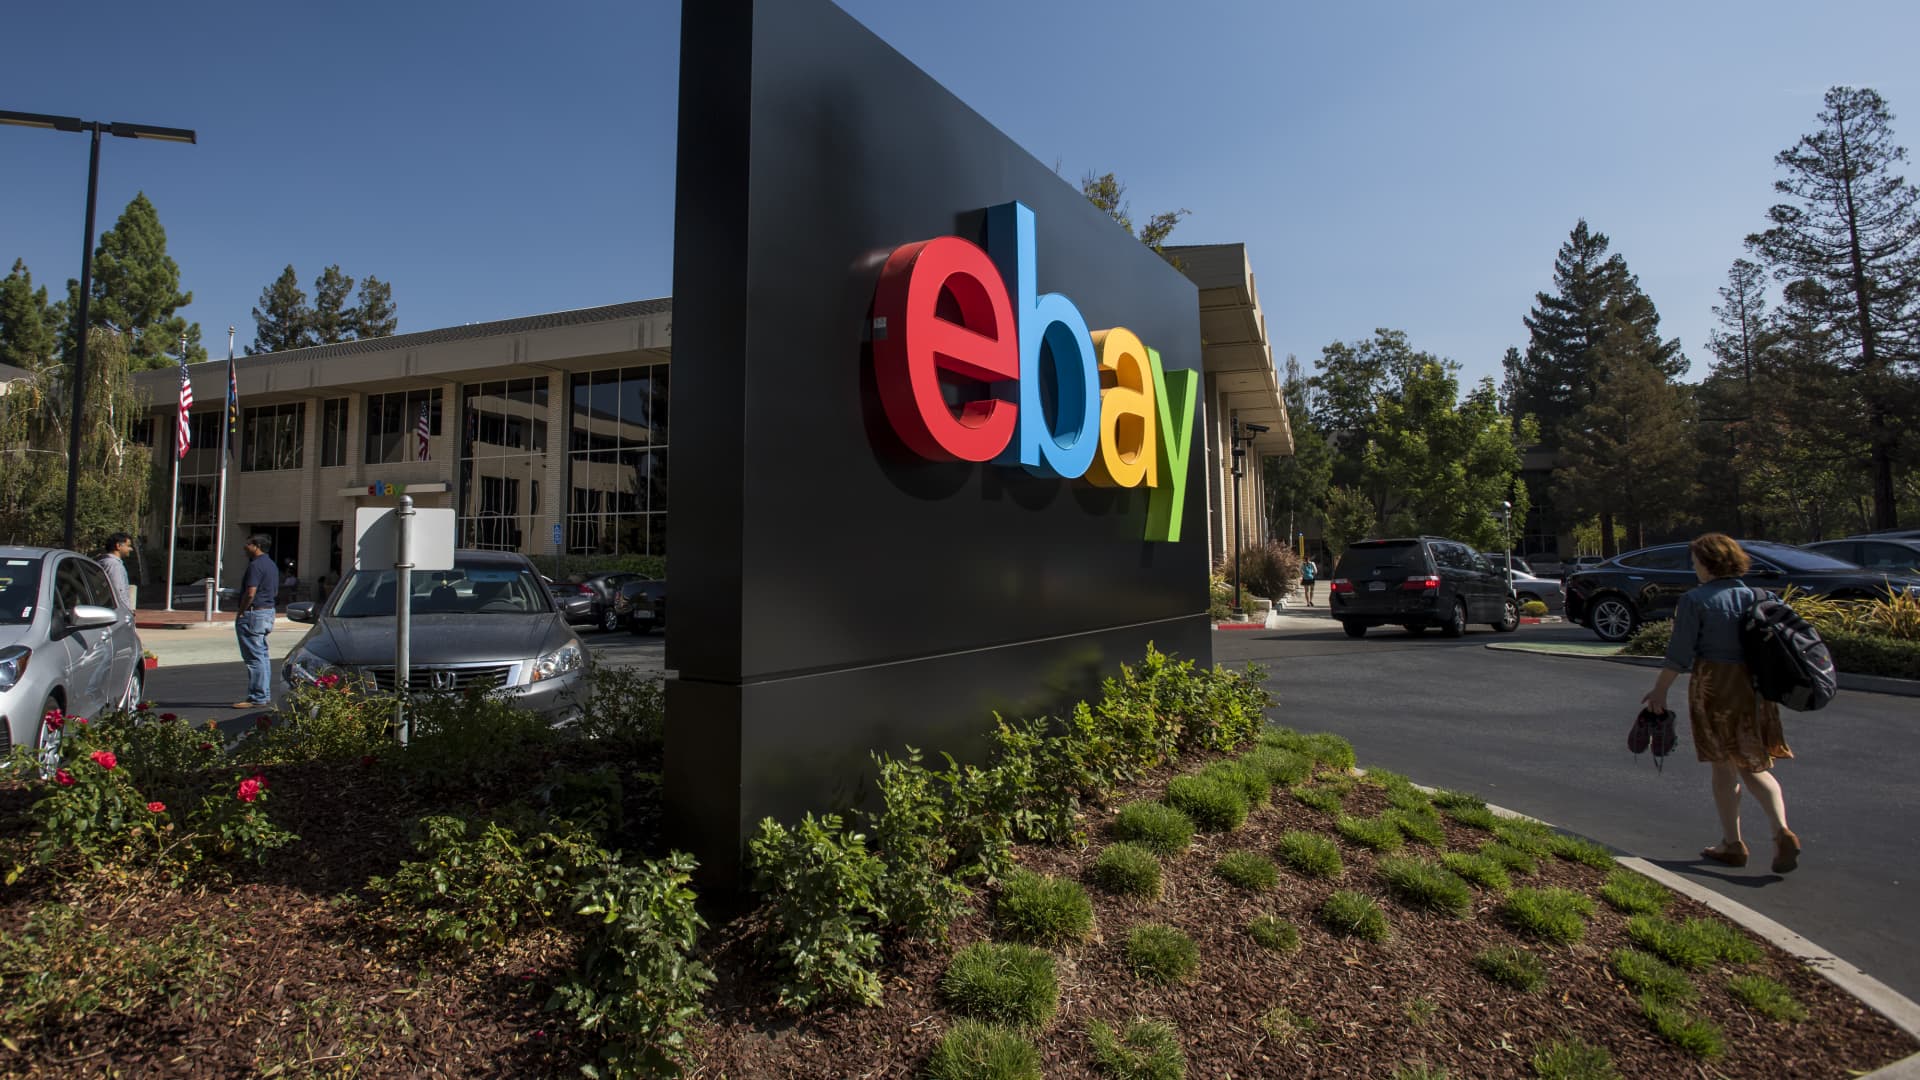 The eBay sign displayed at the company's headquarters in California